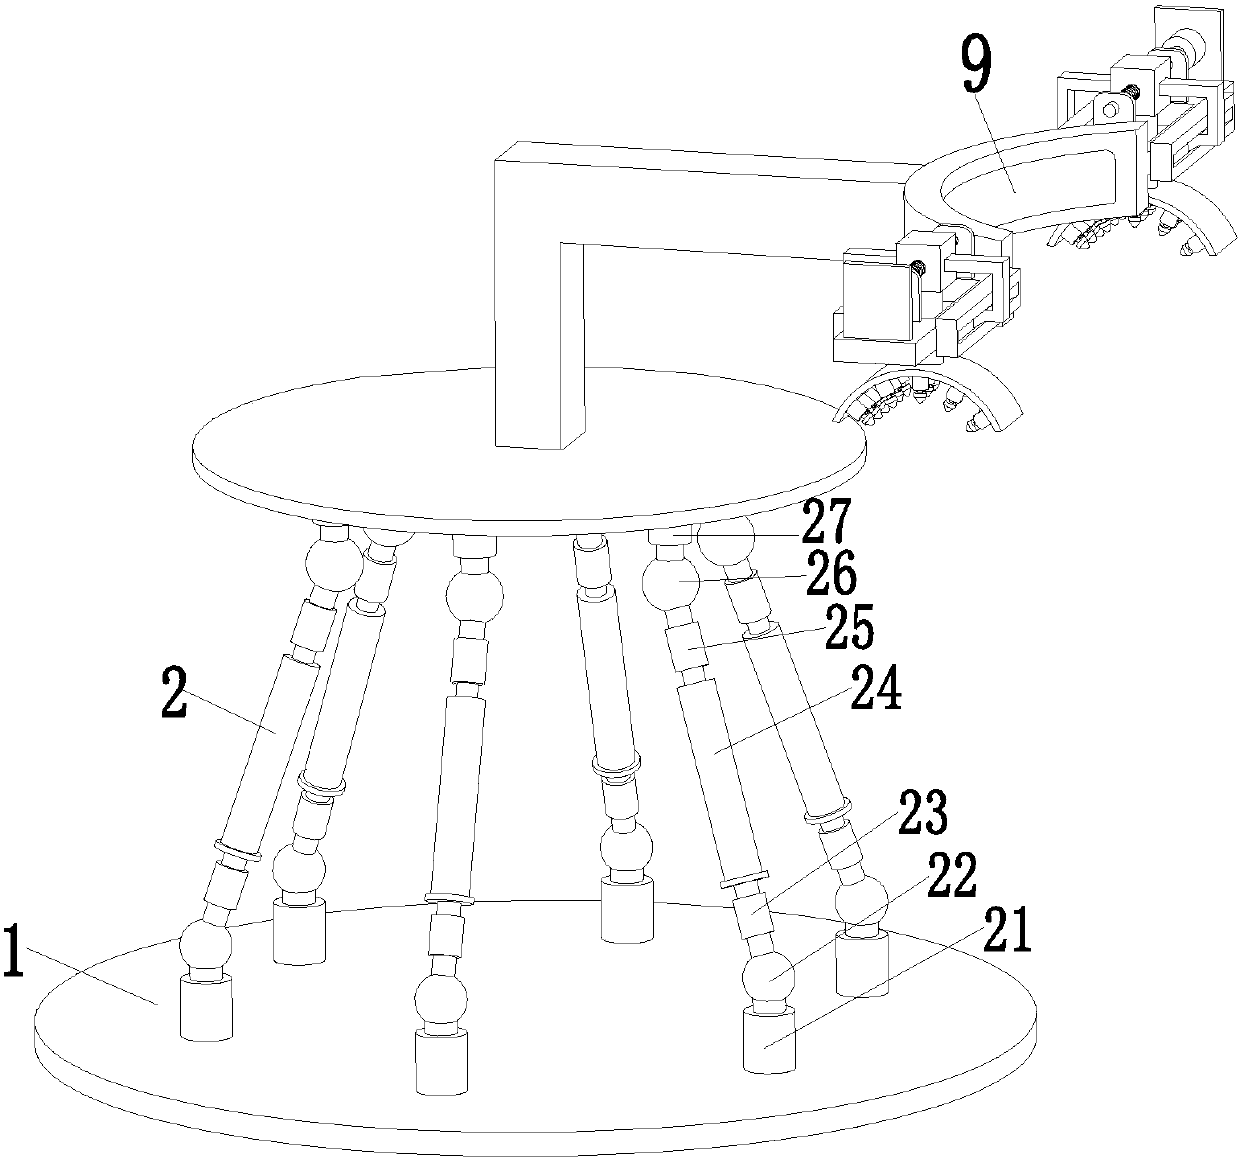 An ultrasonic shoulder massage robot based on a six-degree-of-freedom parallel mechanism